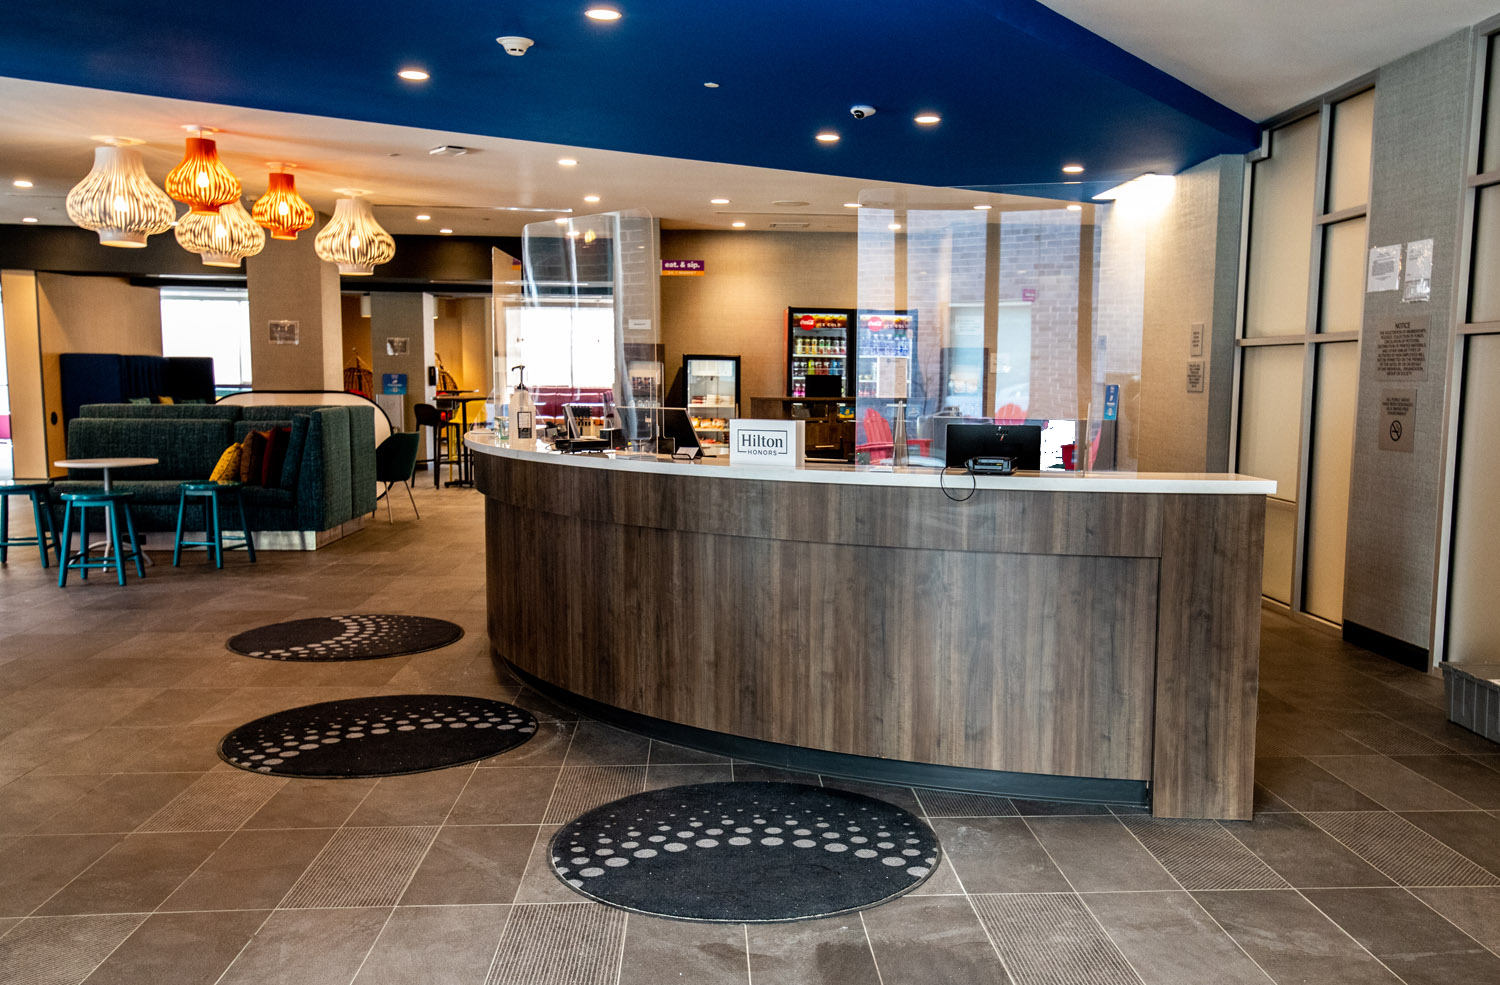 Tru by Hilton and Home2 Suites reception desk featuring custom millwork